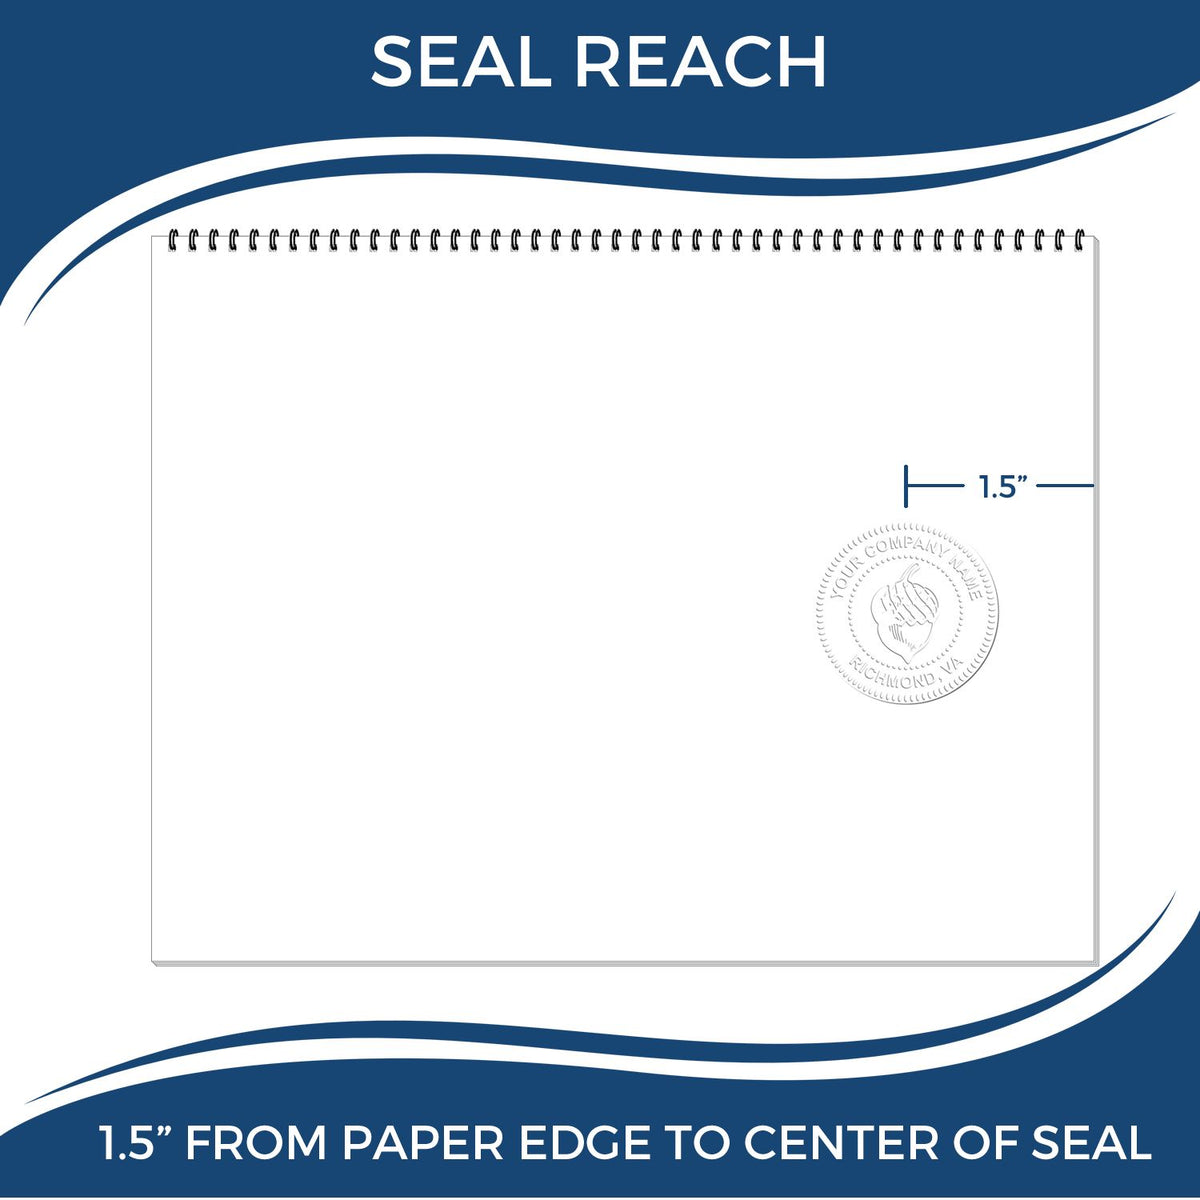 An infographic showing the seal reach which is represented by a ruler and a miniature seal image of the Massachusetts Desk Surveyor Seal Embosser